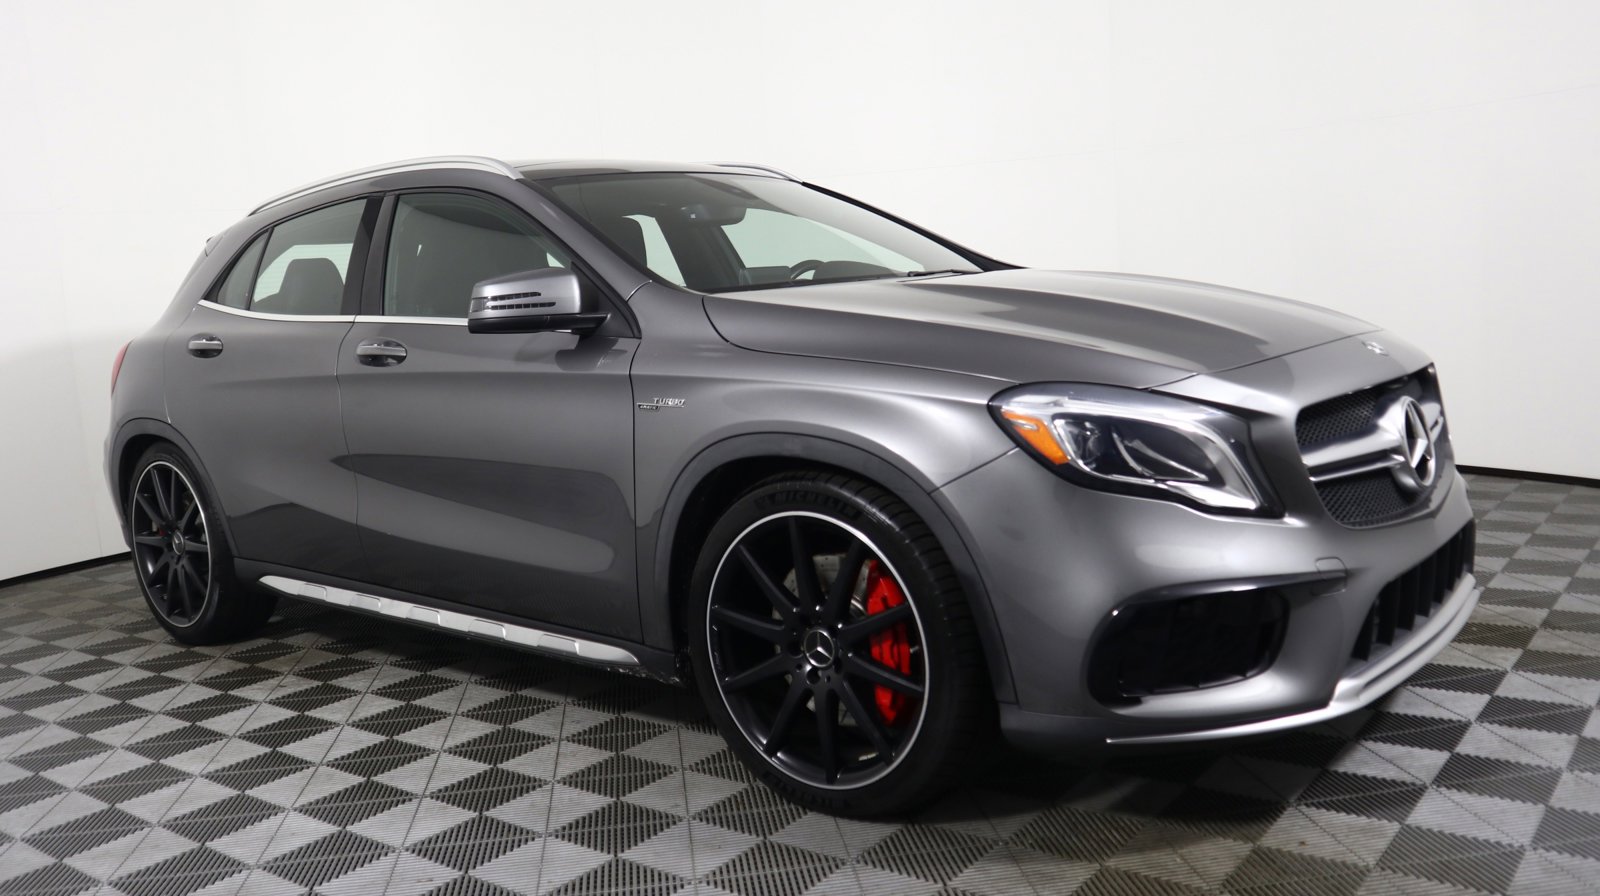 Used 2019 Mercedes-Benz GLA 45 AMG for Sale Right Now - Autotrader